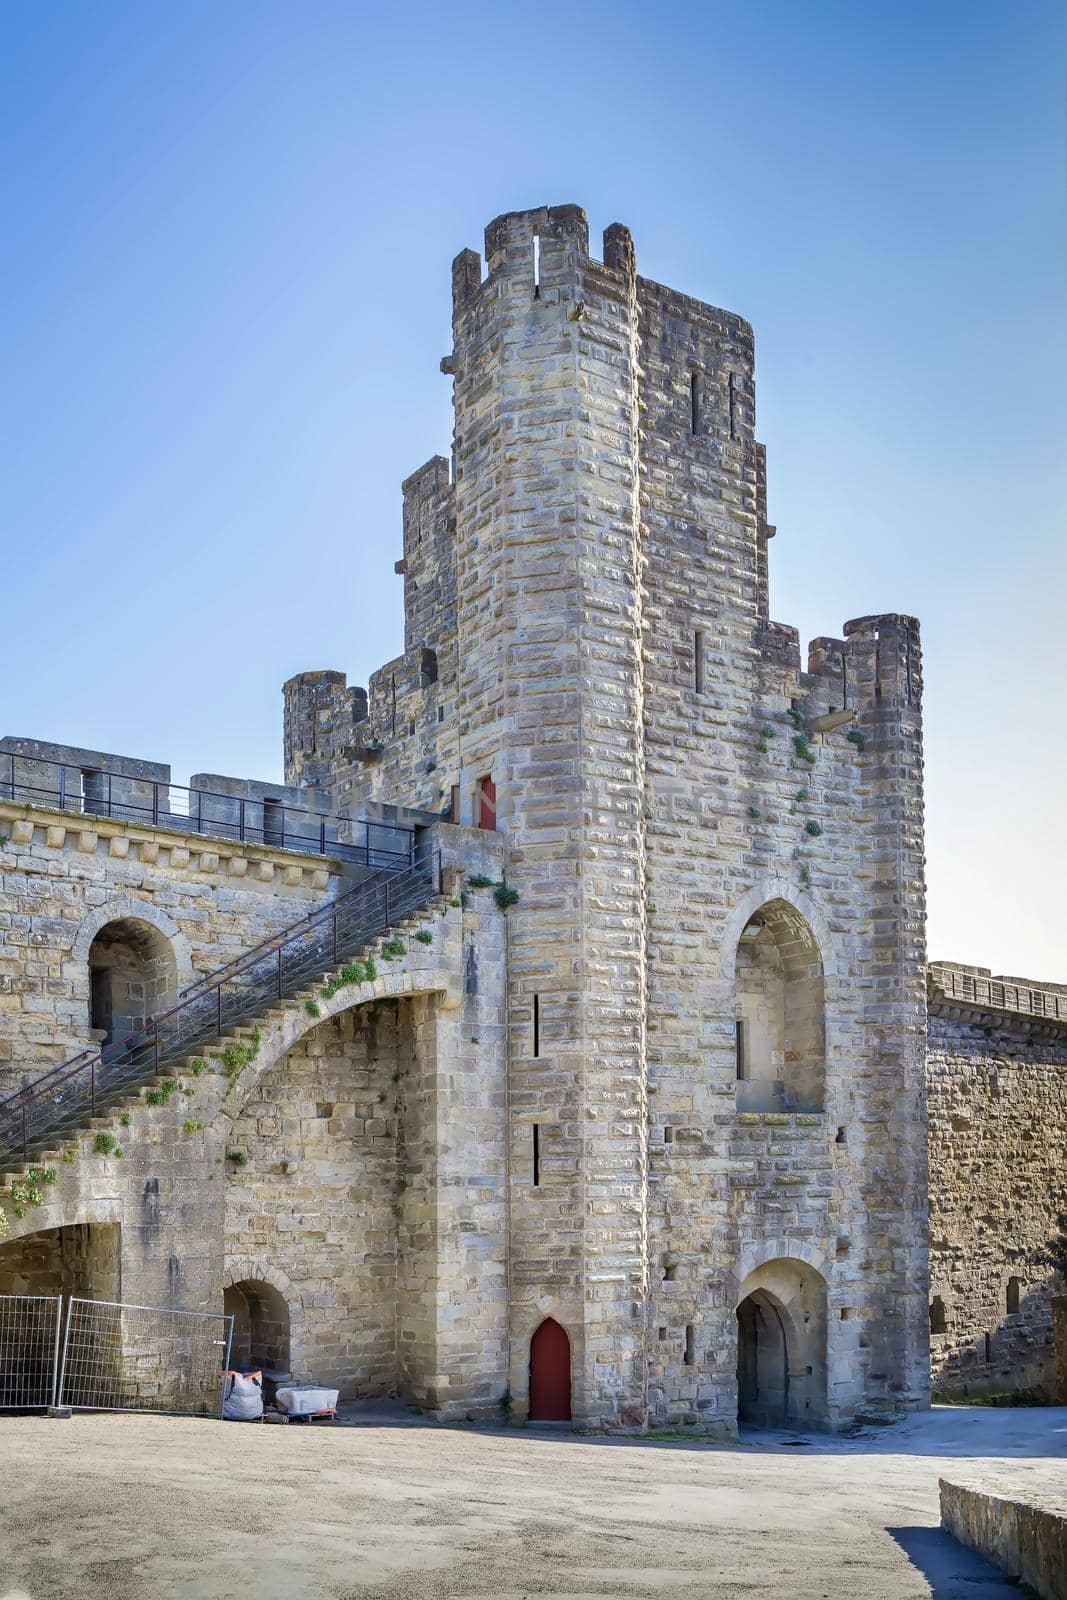  Cite de Carcassonne is a medieval citadel located in the French city of Carcassonne. Tower